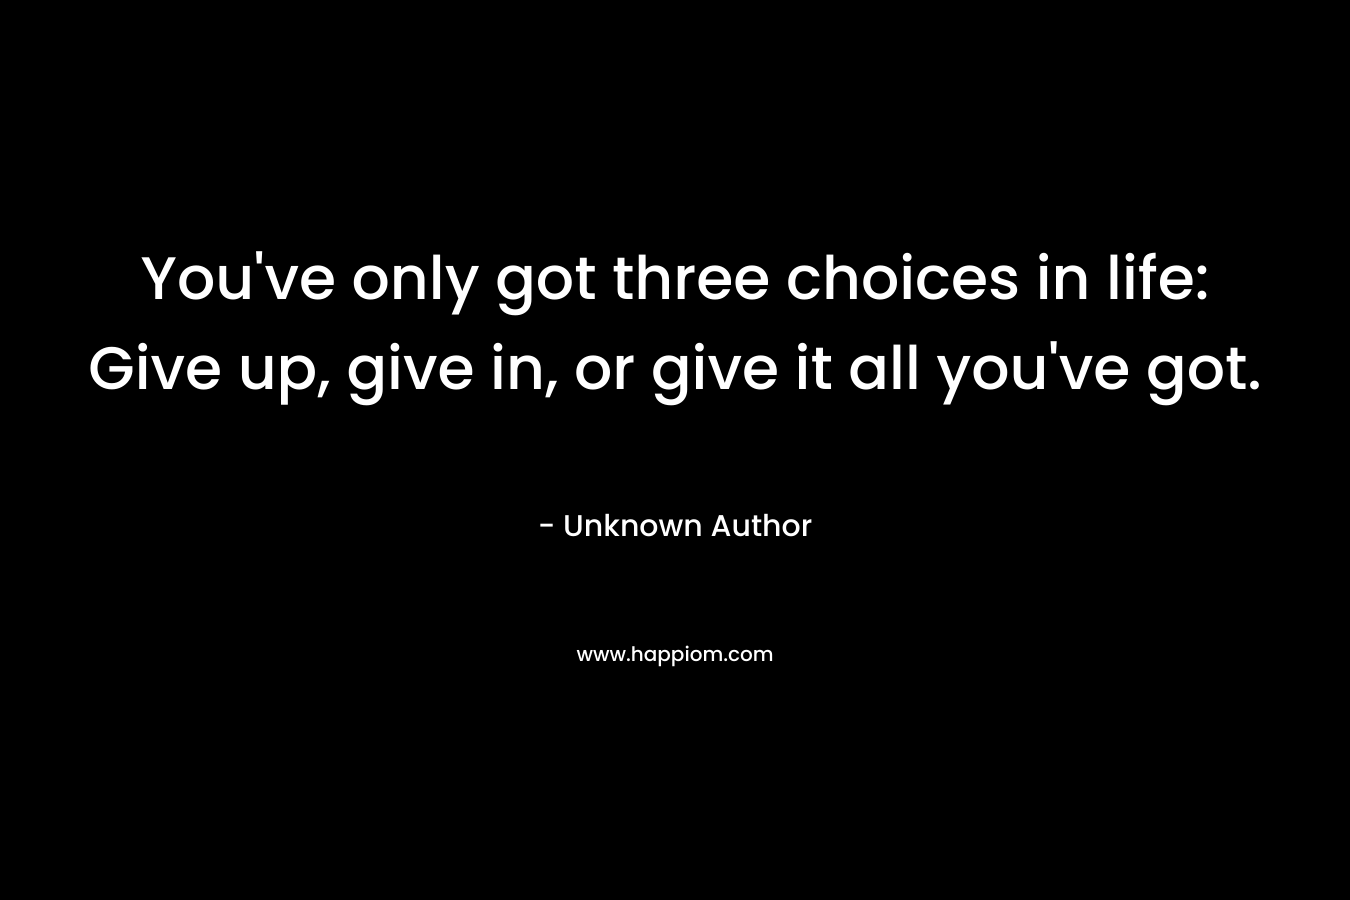 You've only got three choices in life: Give up, give in, or give it all you've got.